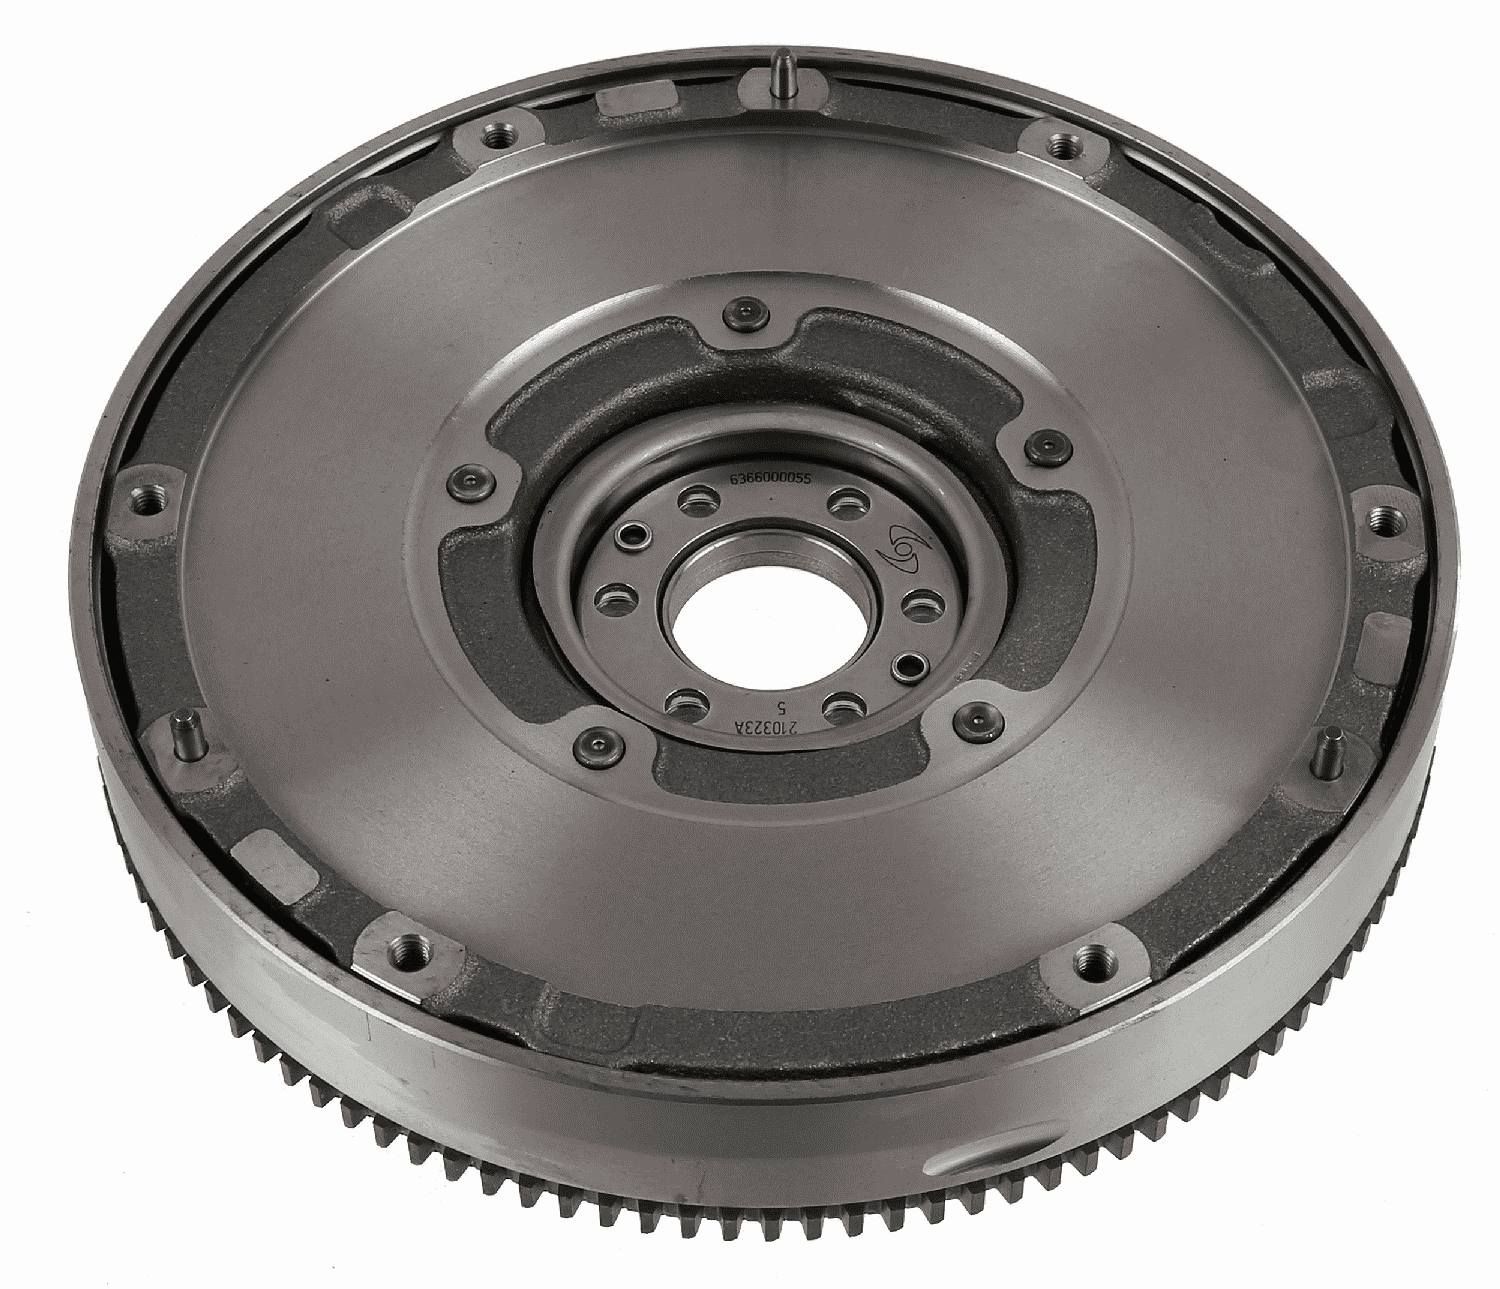 Clutch flywheel 6366 000 055 Ford FOCUS 2019 – buy replacement parts